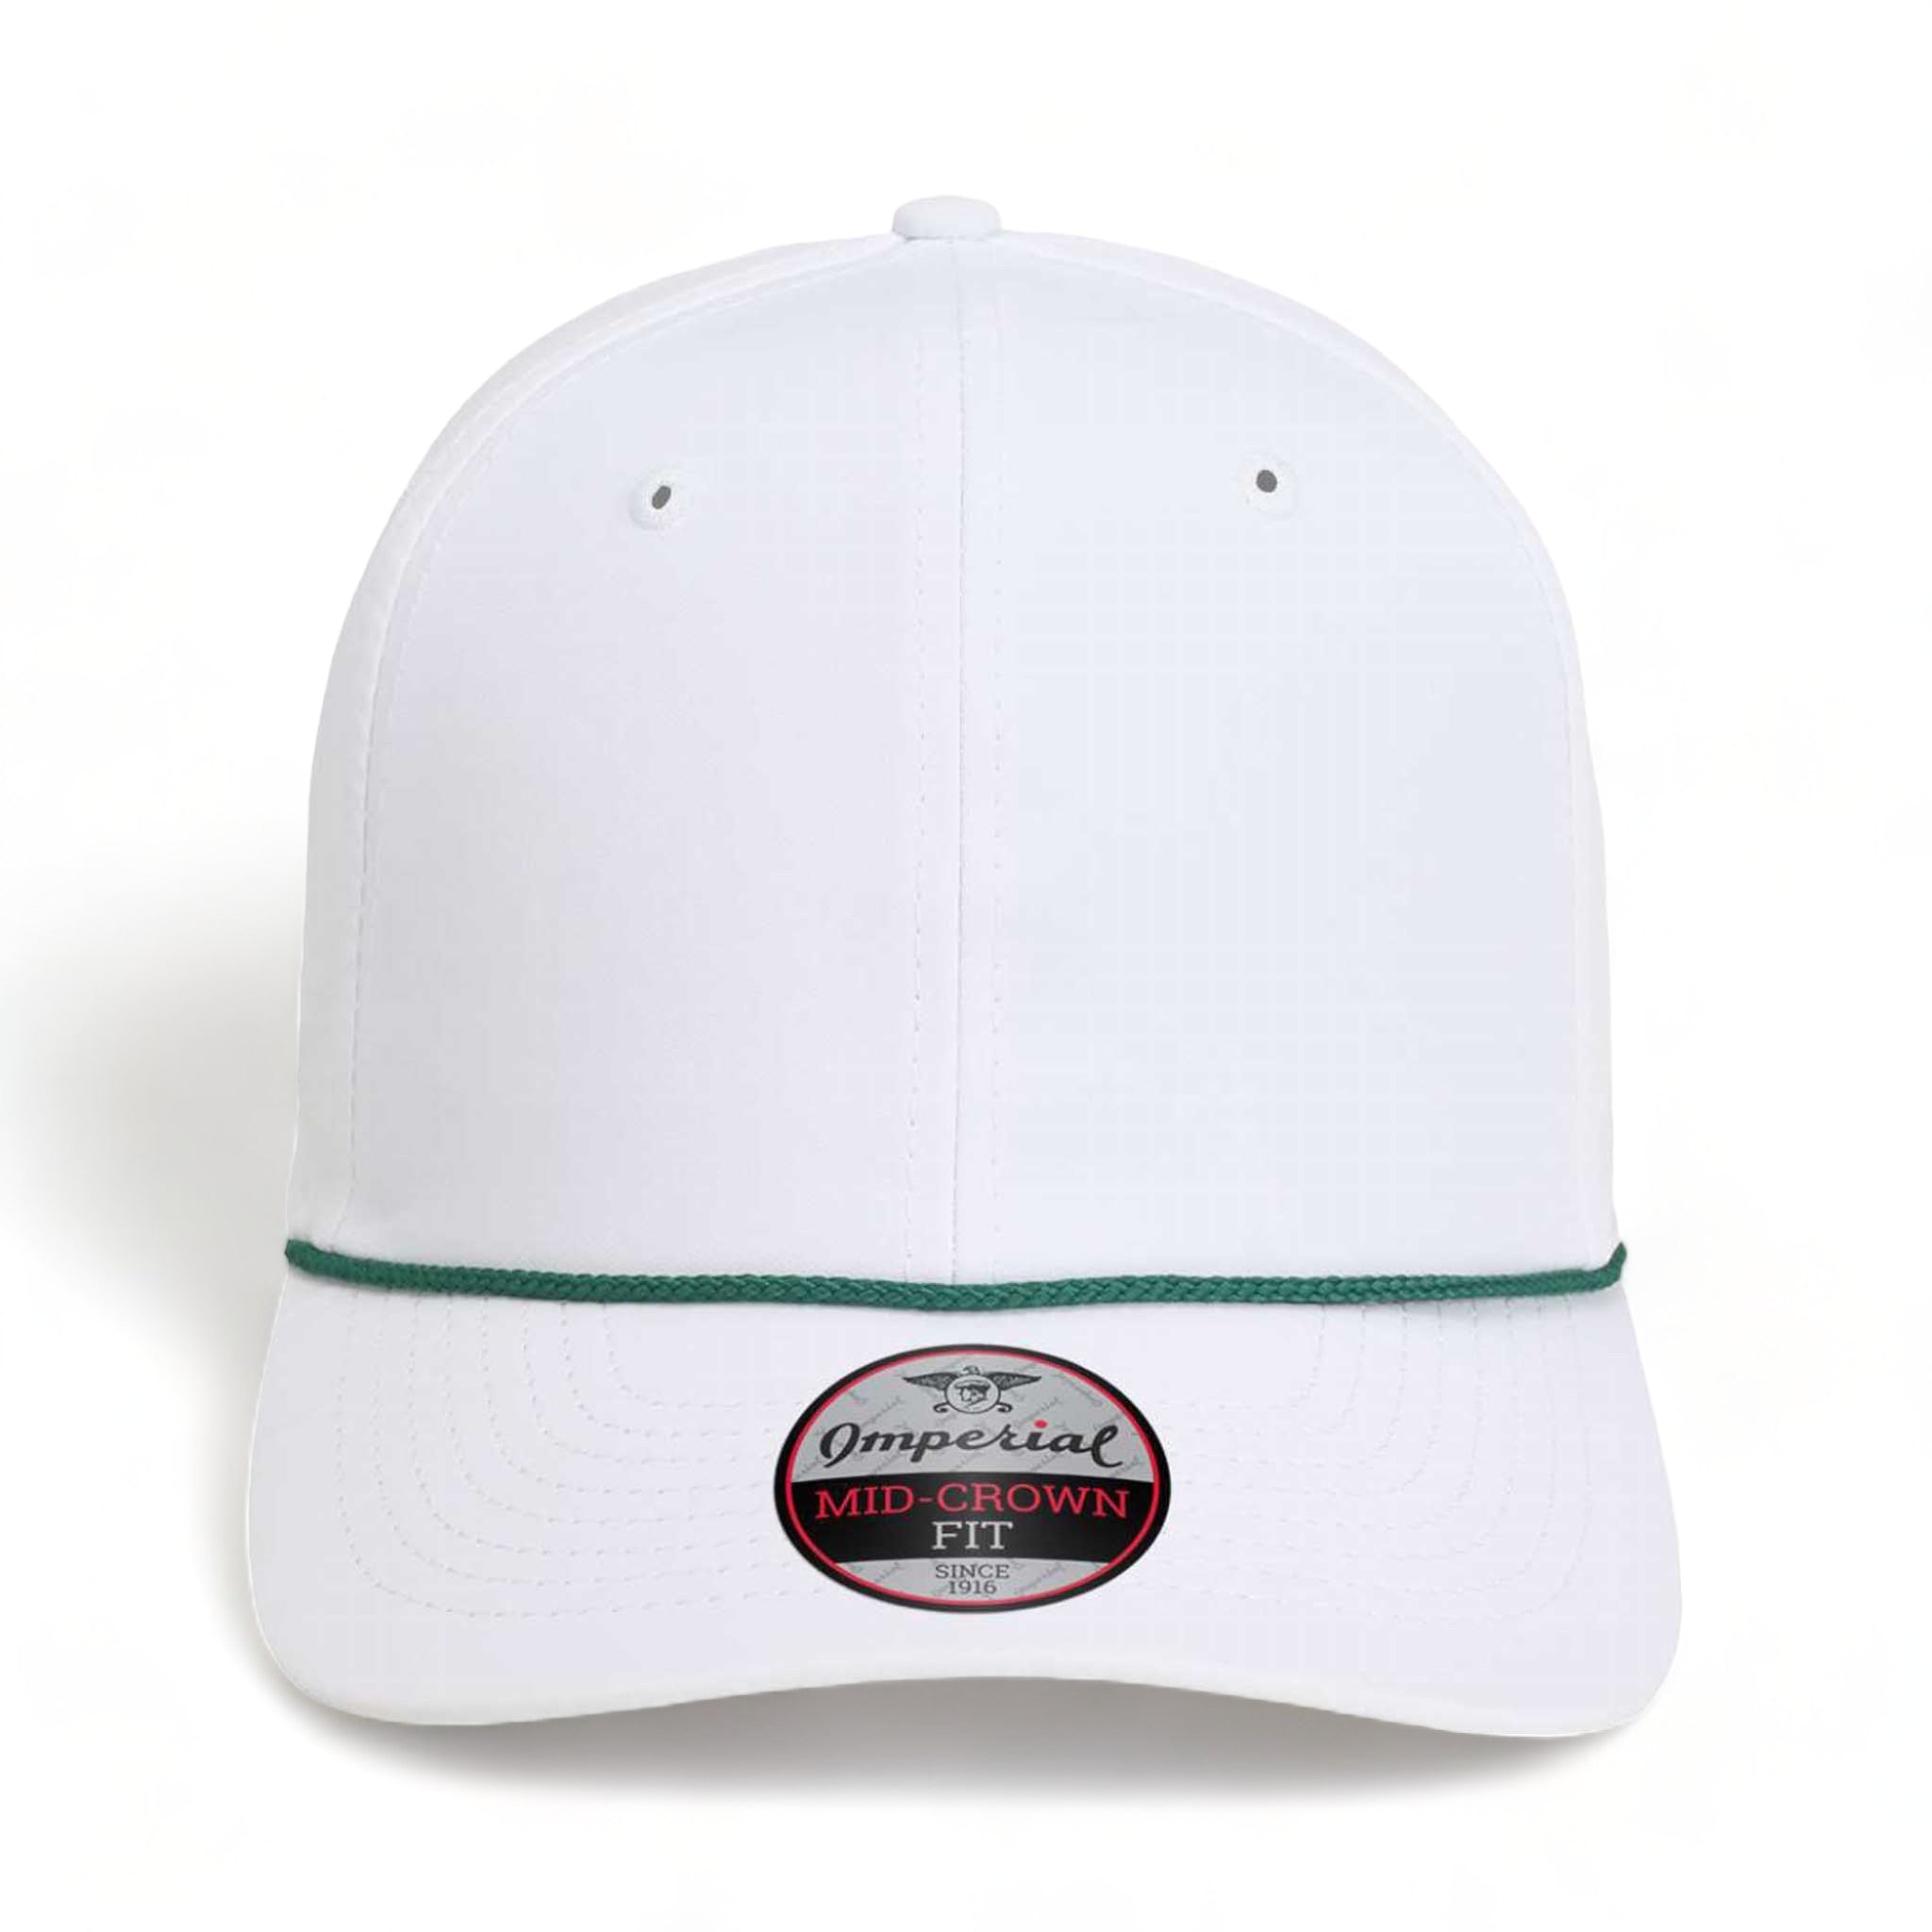 Front view of Imperial 7054 custom hat in white and dark green